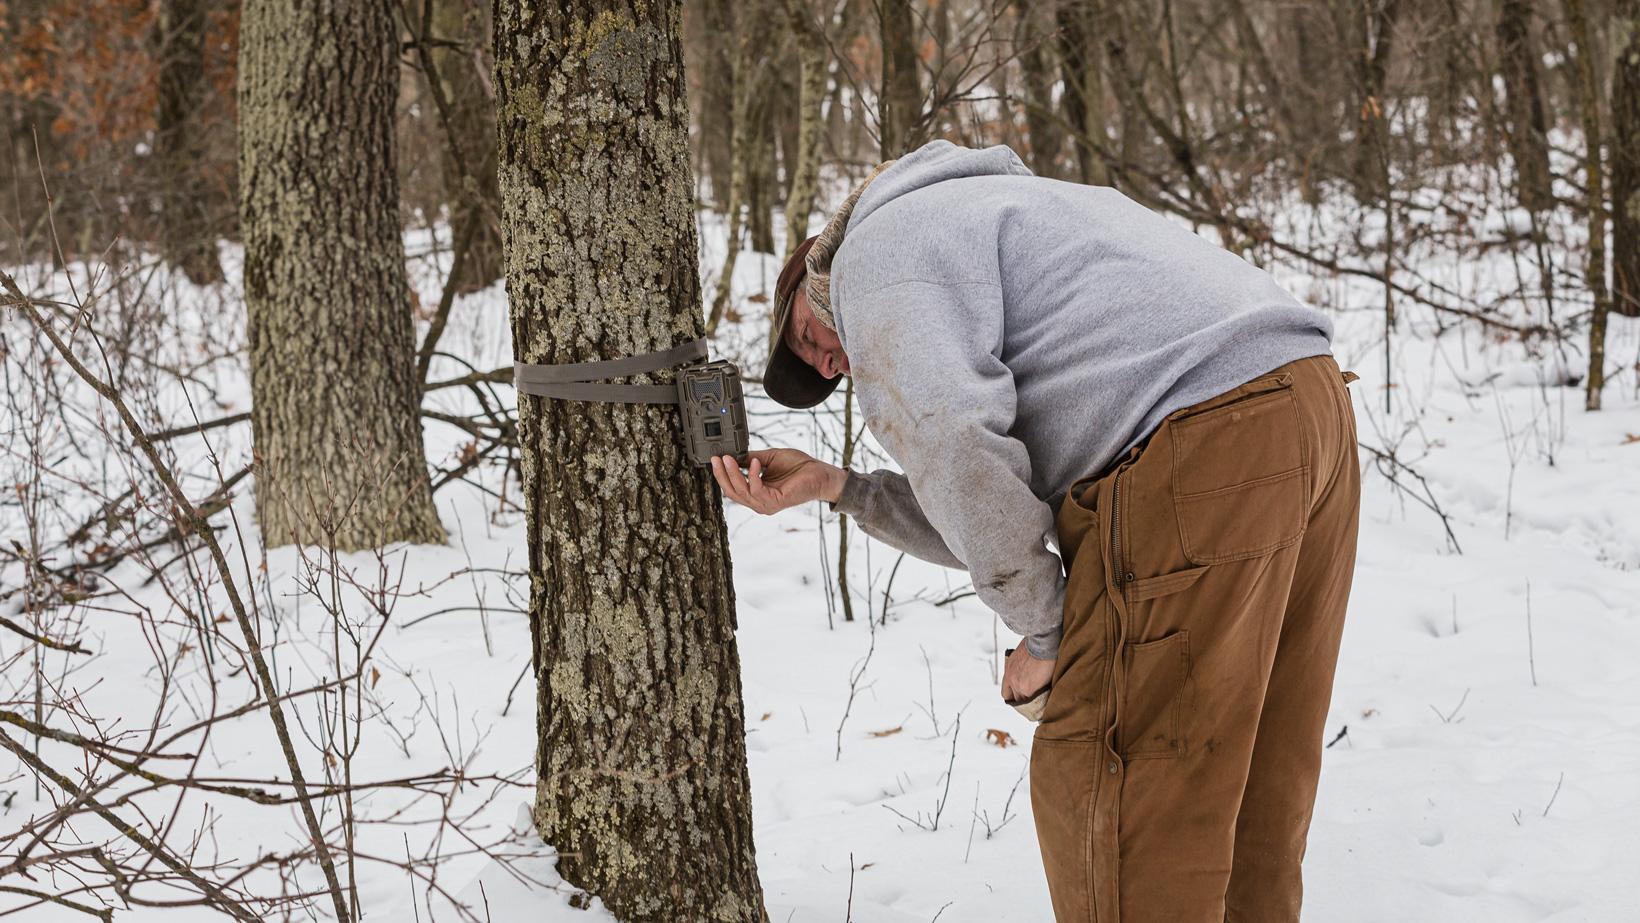 Checking trail camera for whitetail deer in late season